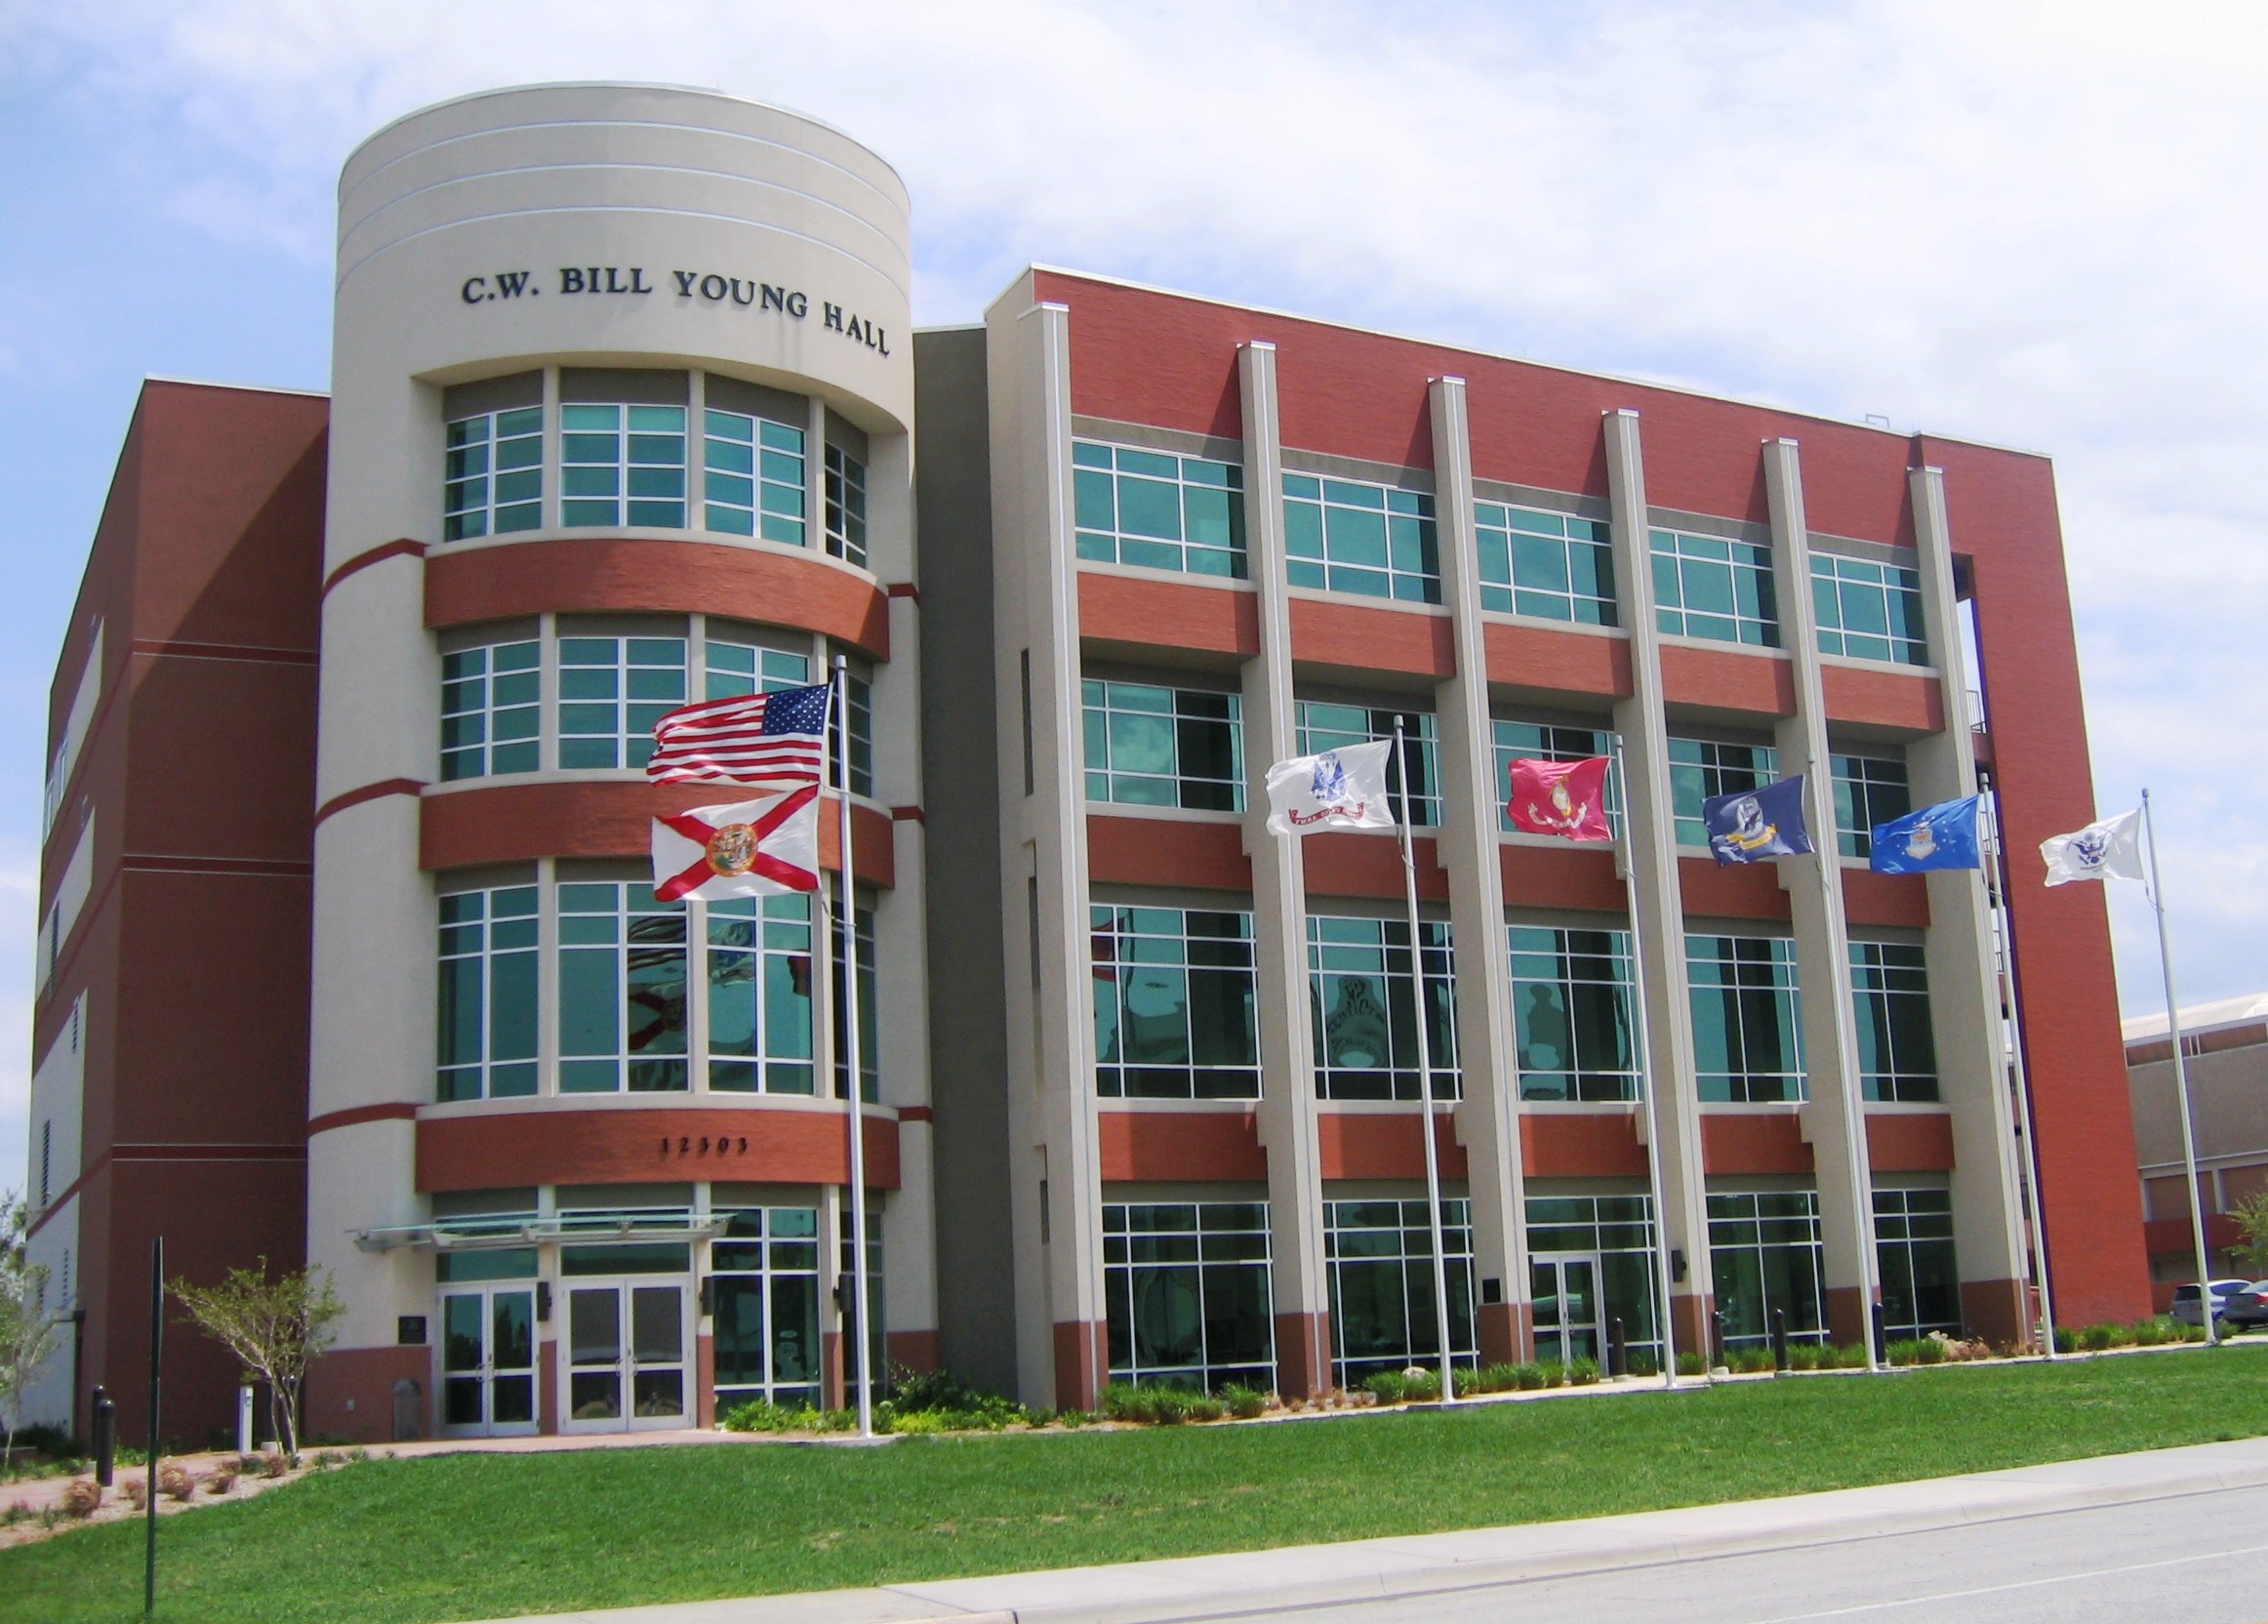 C.W. Bill Young Hall